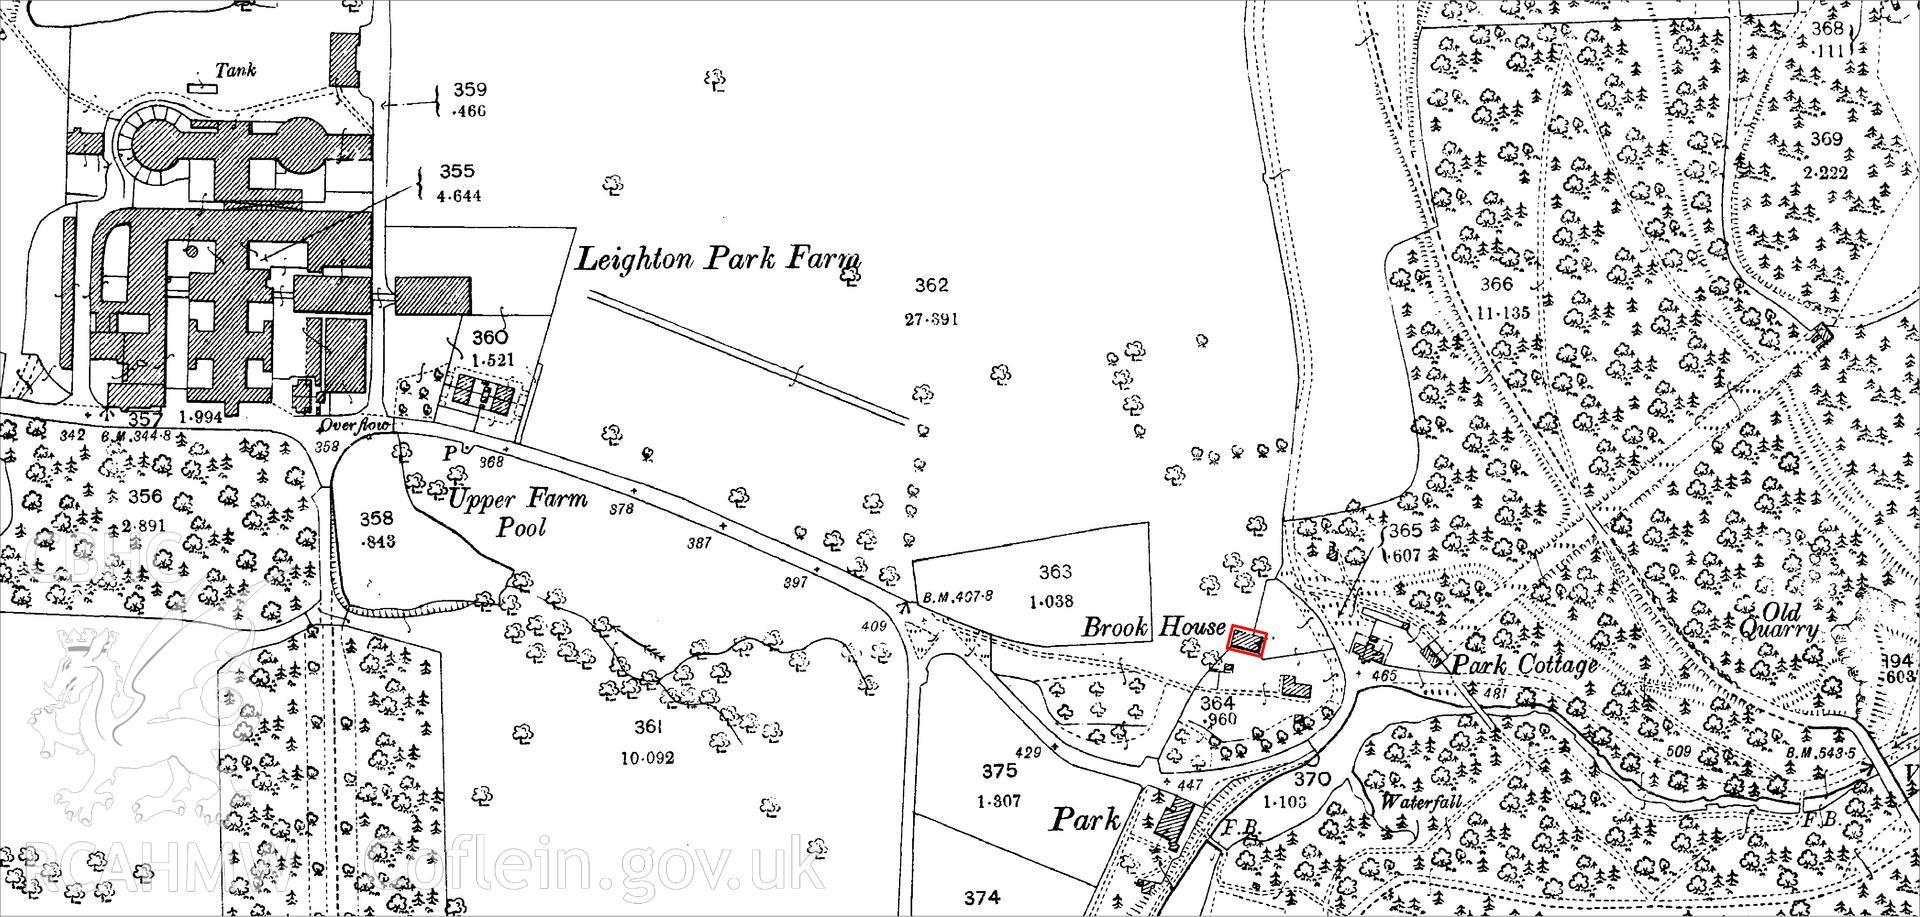 1902 OS map used in report illustrations prepared as part of CPAT Project 2356: Brook House Tank, Leighton, Powys - Building Survey, 2019. Report no. 1645.